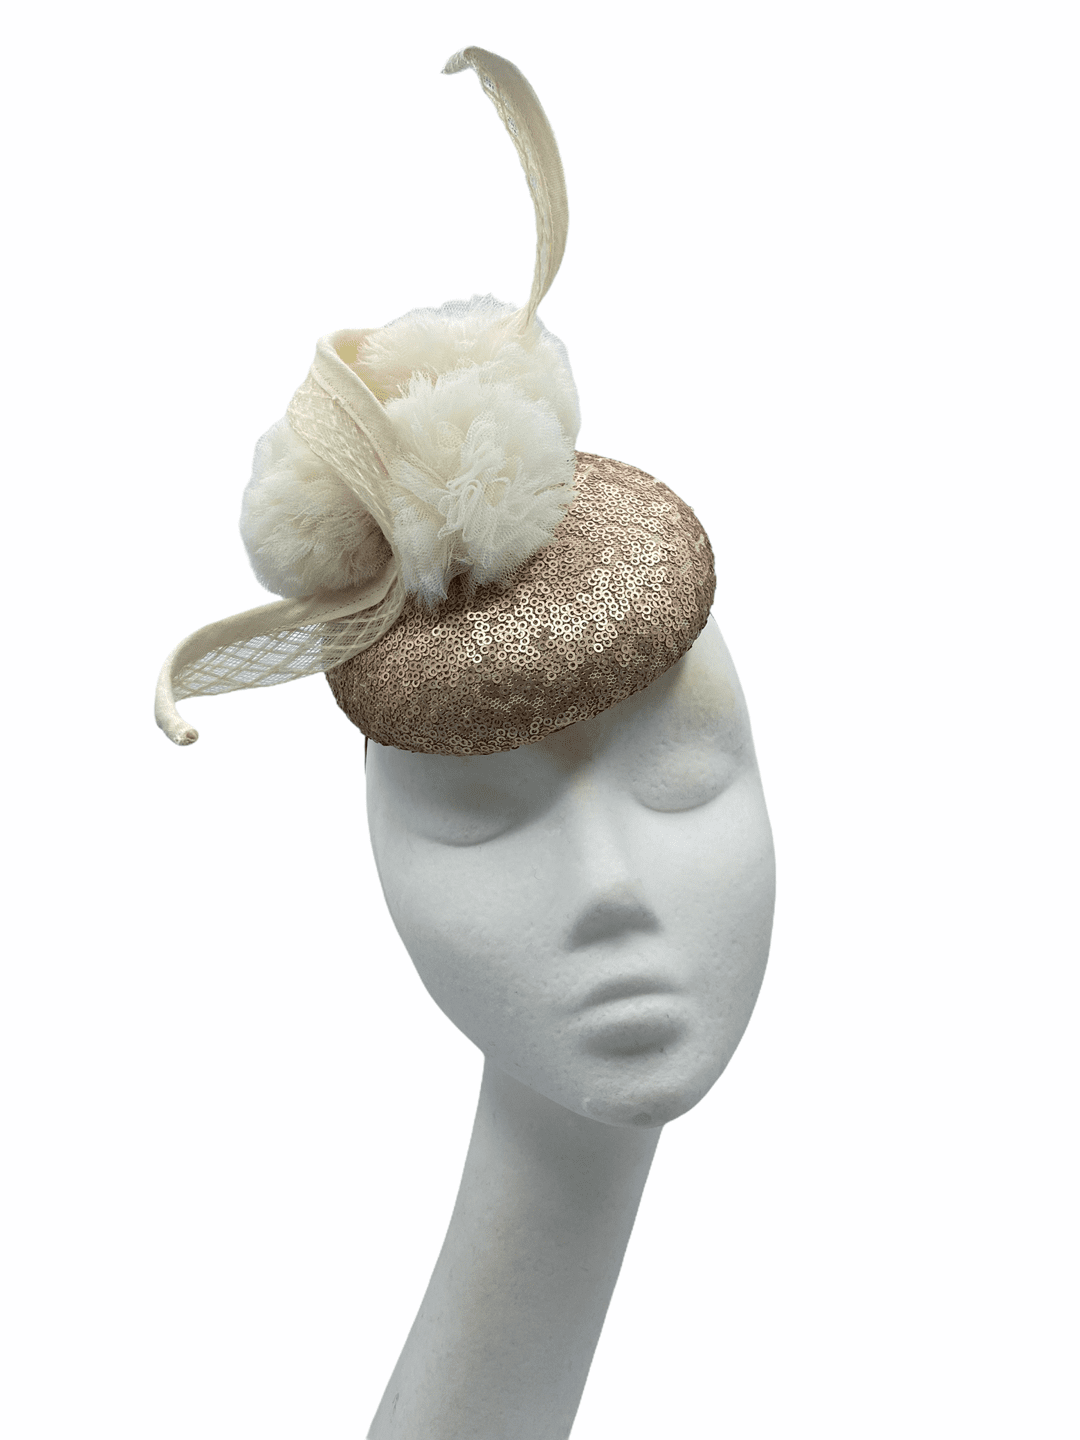 Small button rose gold sequinned headpiece with cream pom pom detail and cream swirl detail to finish.